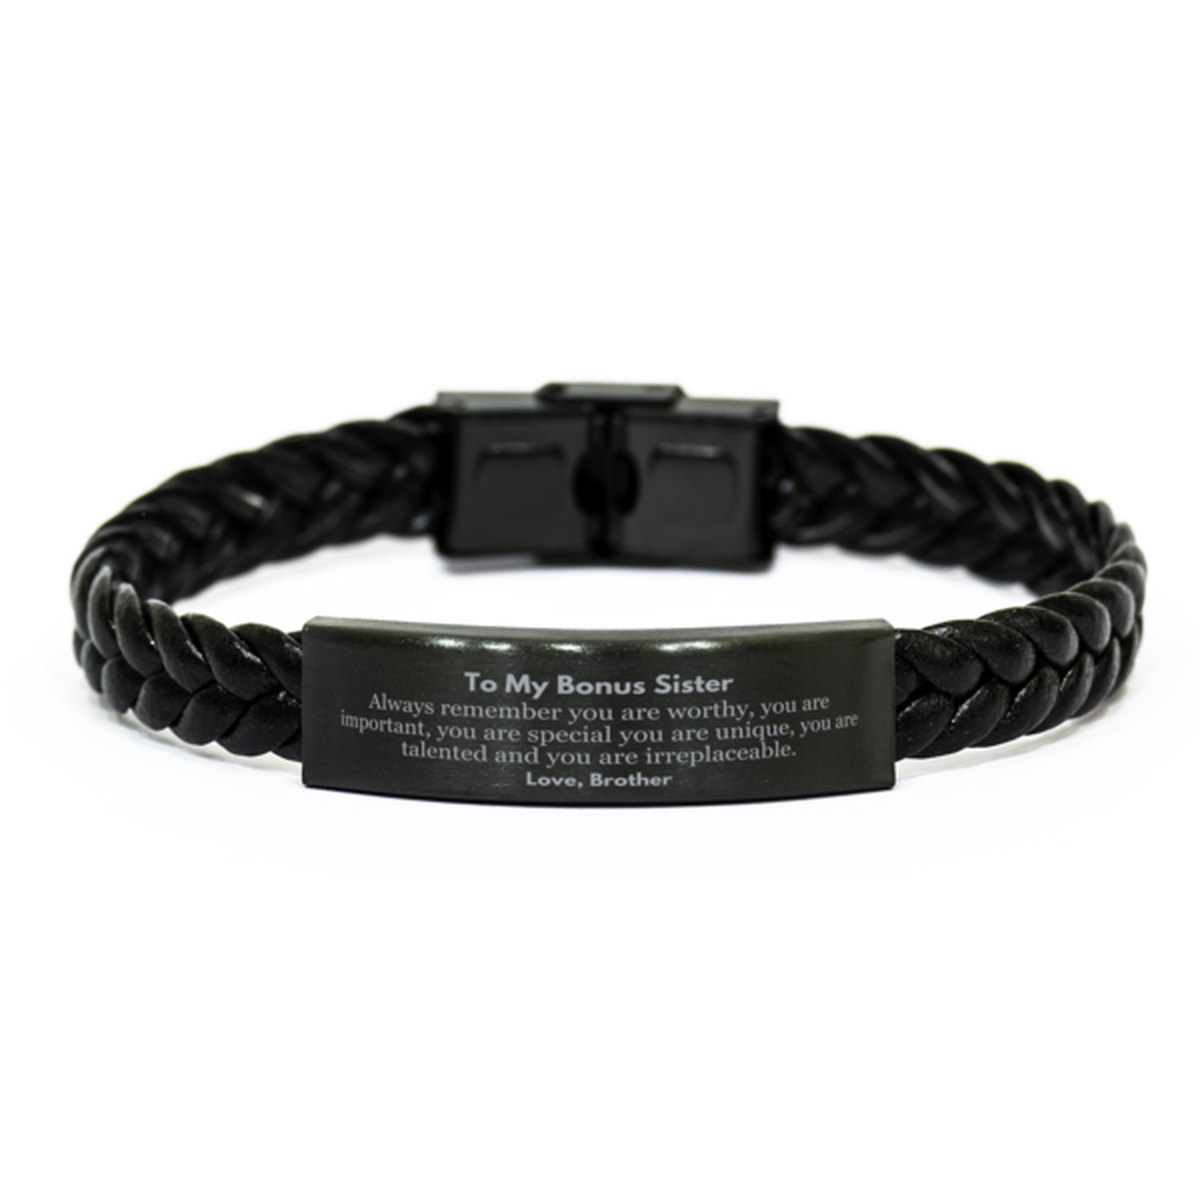 Bonus Sister Birthday Gifts from Brother, Inspirational Braided Leather Bracelet for Bonus Sister Christmas Graduation Gifts for Bonus Sister Always remember you are worthy, you are important. Love, Brother